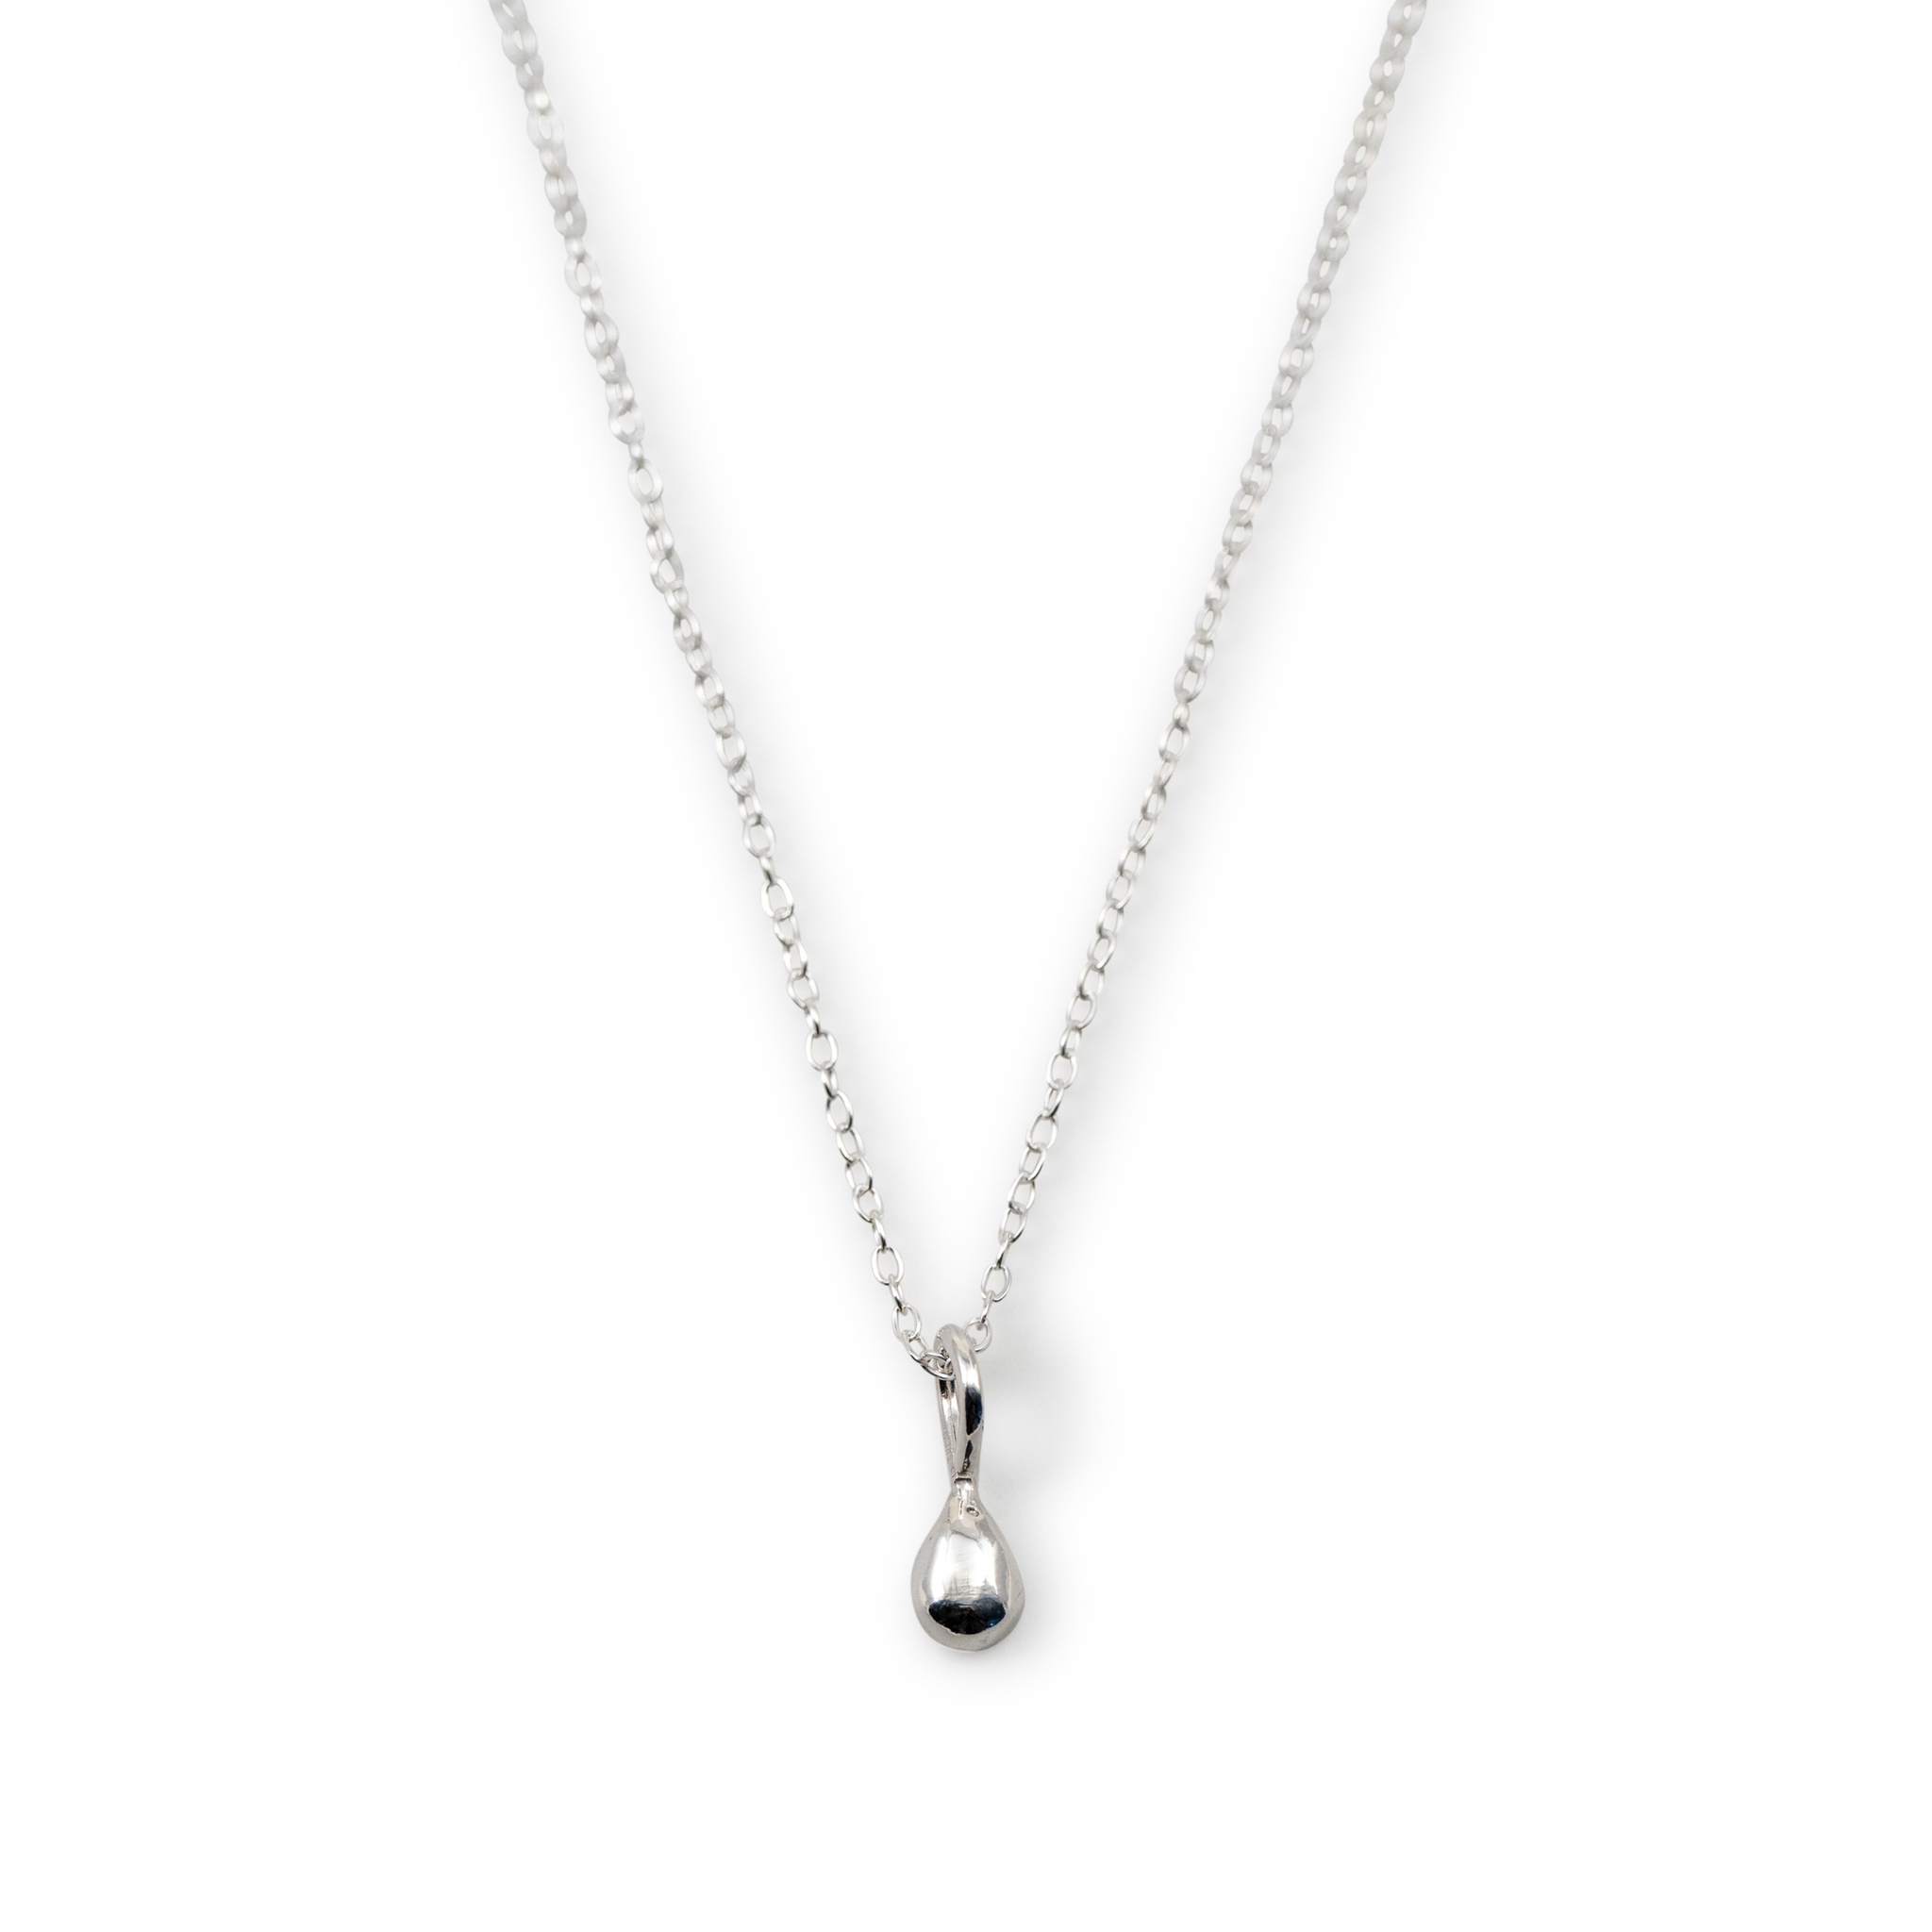 Droplet Necklace - Recycled Sterling Silver